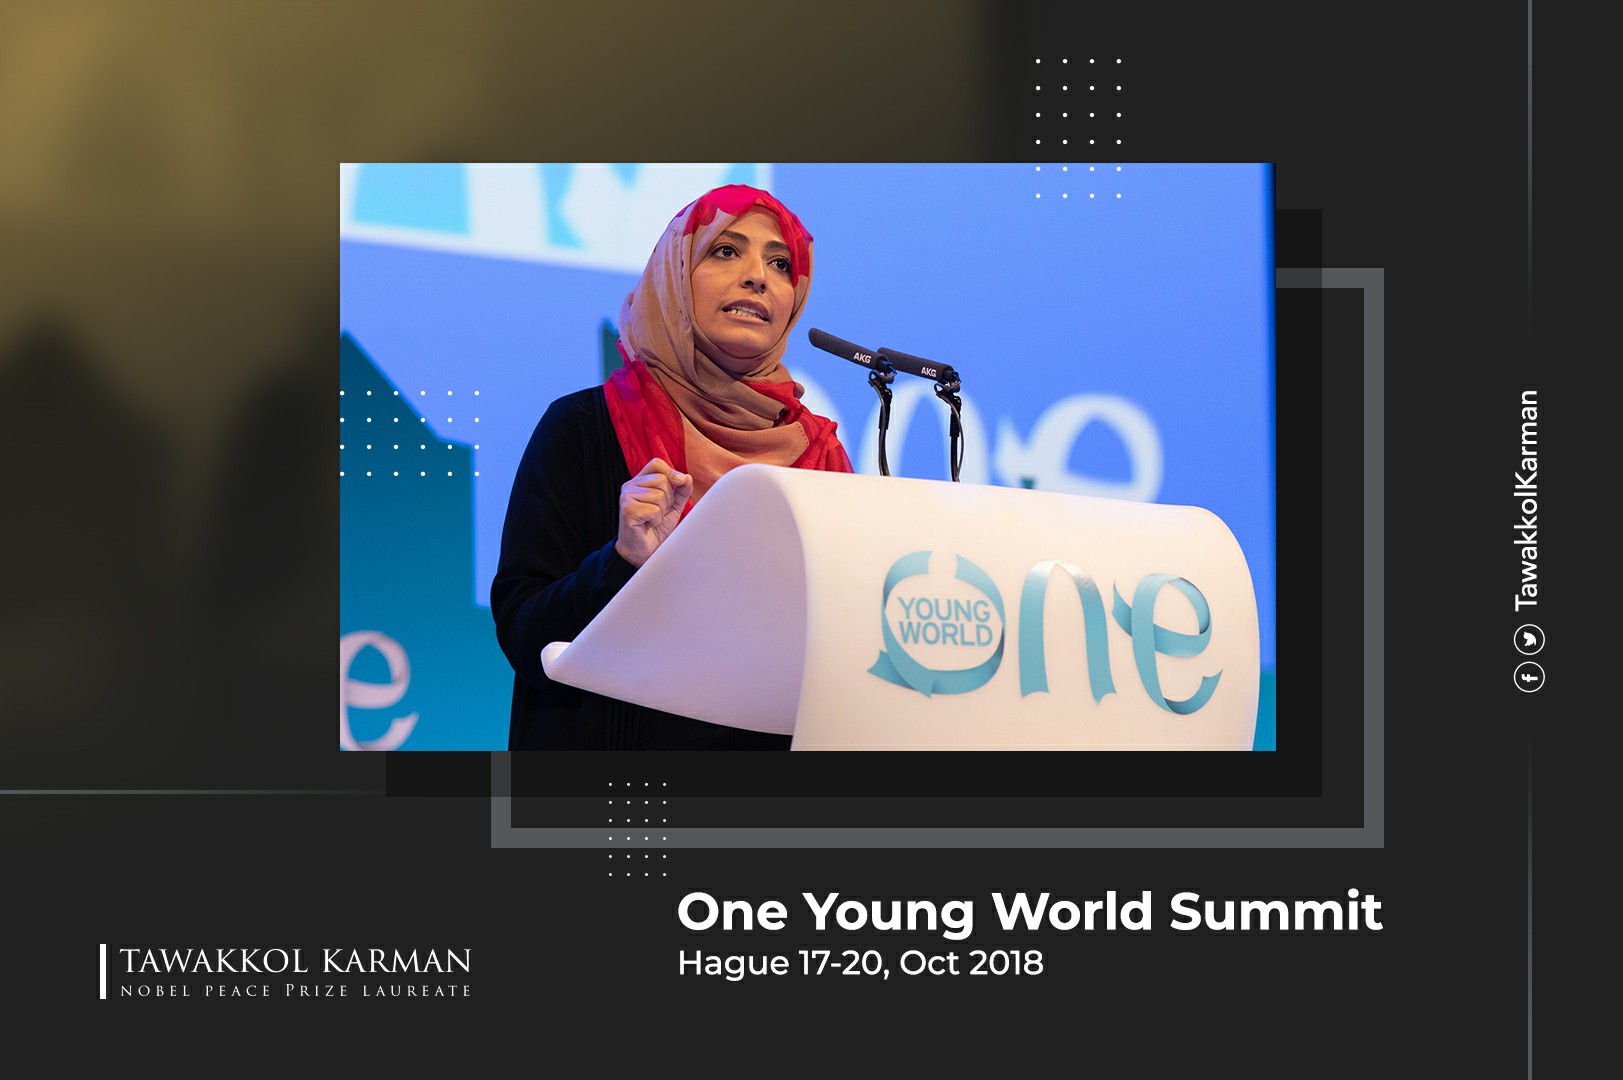 Participation of Tawakkol Karman at the One Young World Summit - The Hague